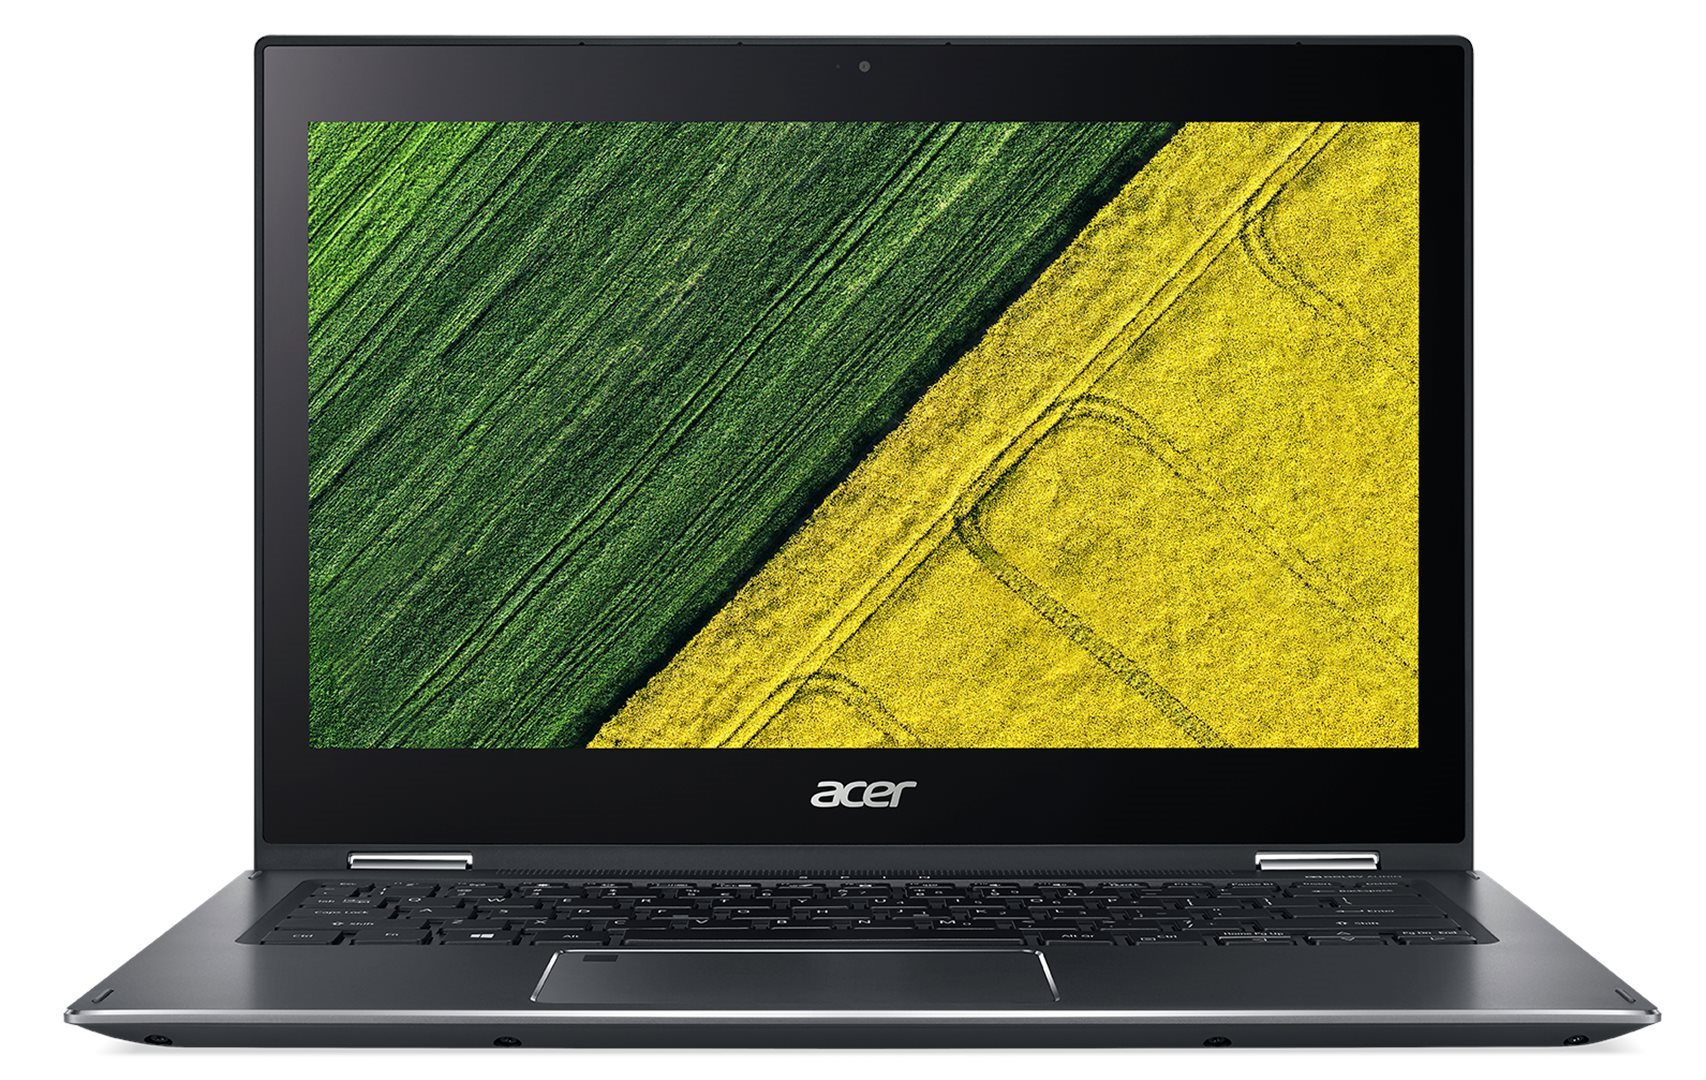 Acer Spin 5 (SP513-53N-58E5) i5-8265U/8GB+N/A/256GB SSD+N/A/HD Graphics/13.3" Multi-touch FHD IPS/BT/W10 Home/Gray